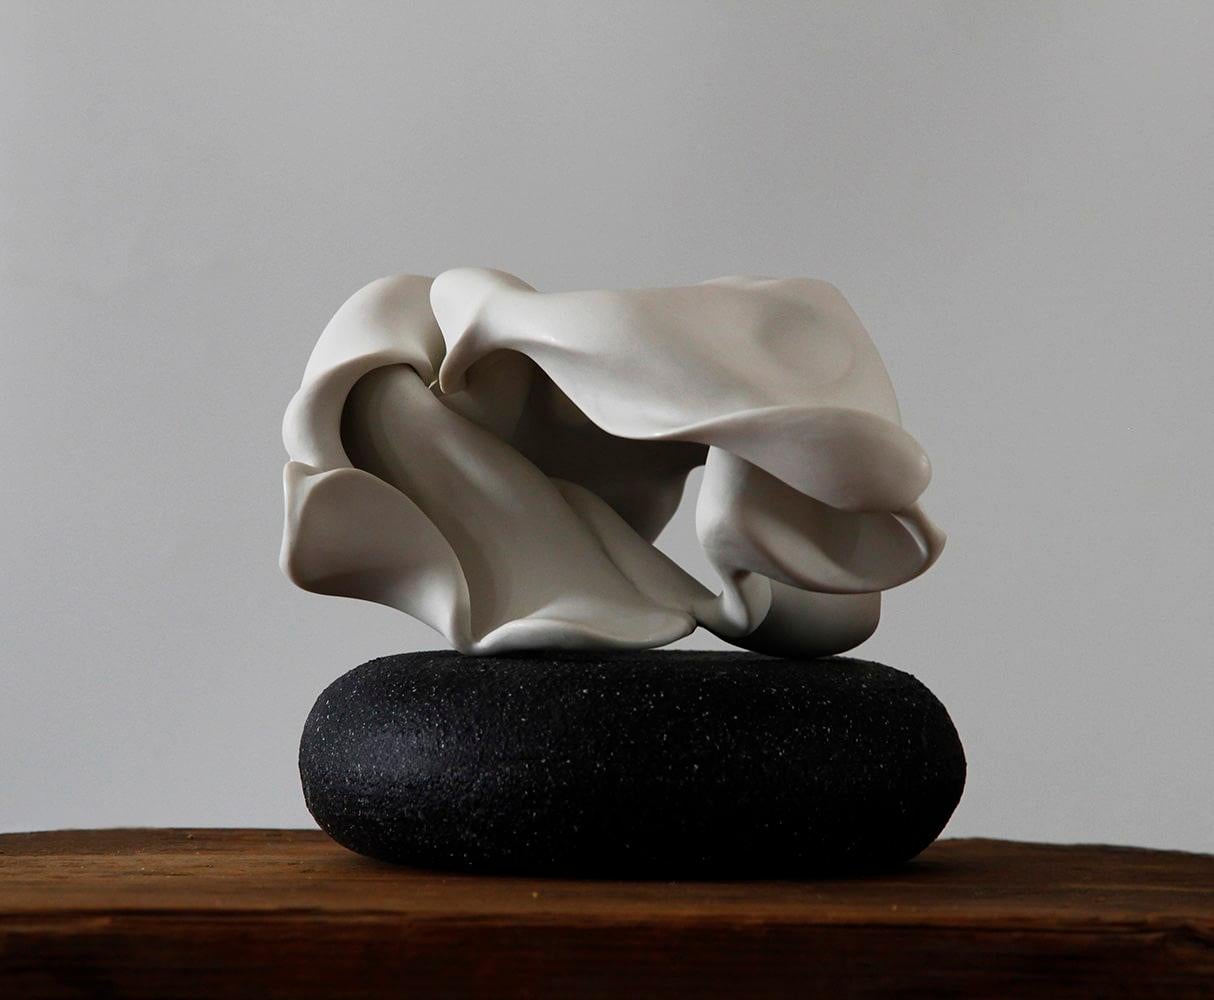 Sharon Brill - Be-formed 4 by Sharon Brill - wall sculpture, porcelain,  white For Sale at 1stDibs